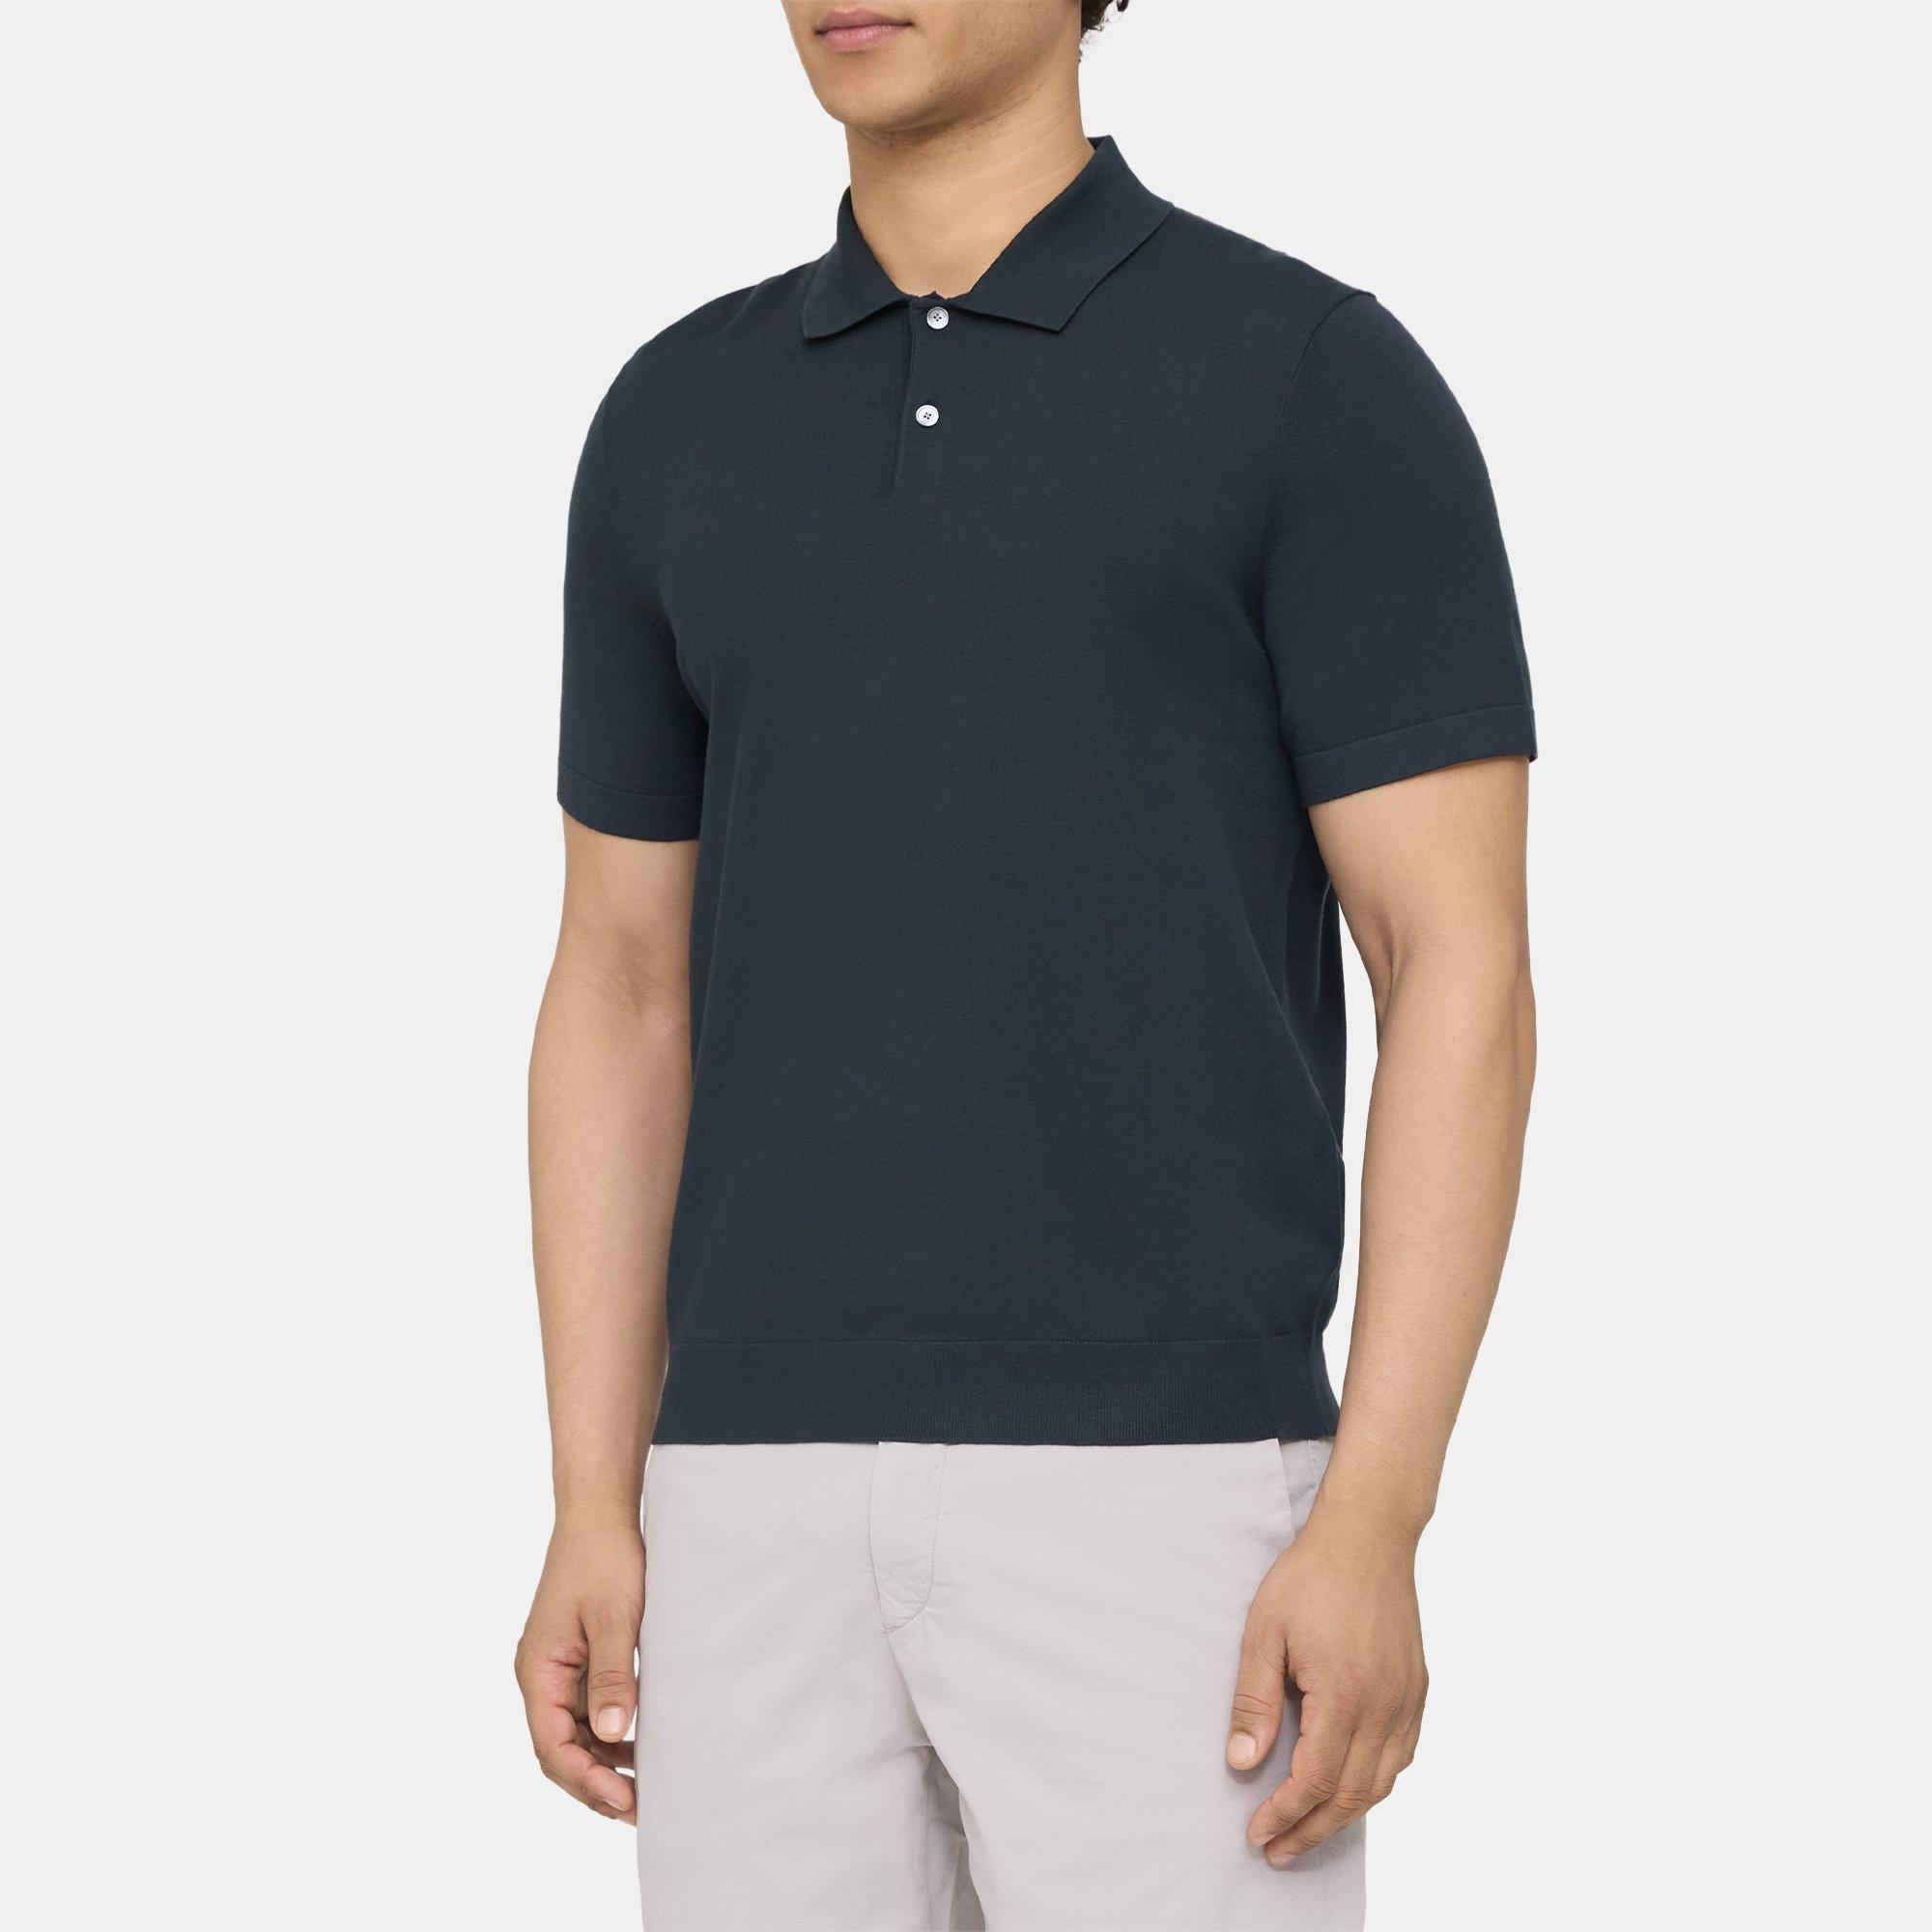 Stretch Viscose Blend Polo Shirt | Theory Outlet